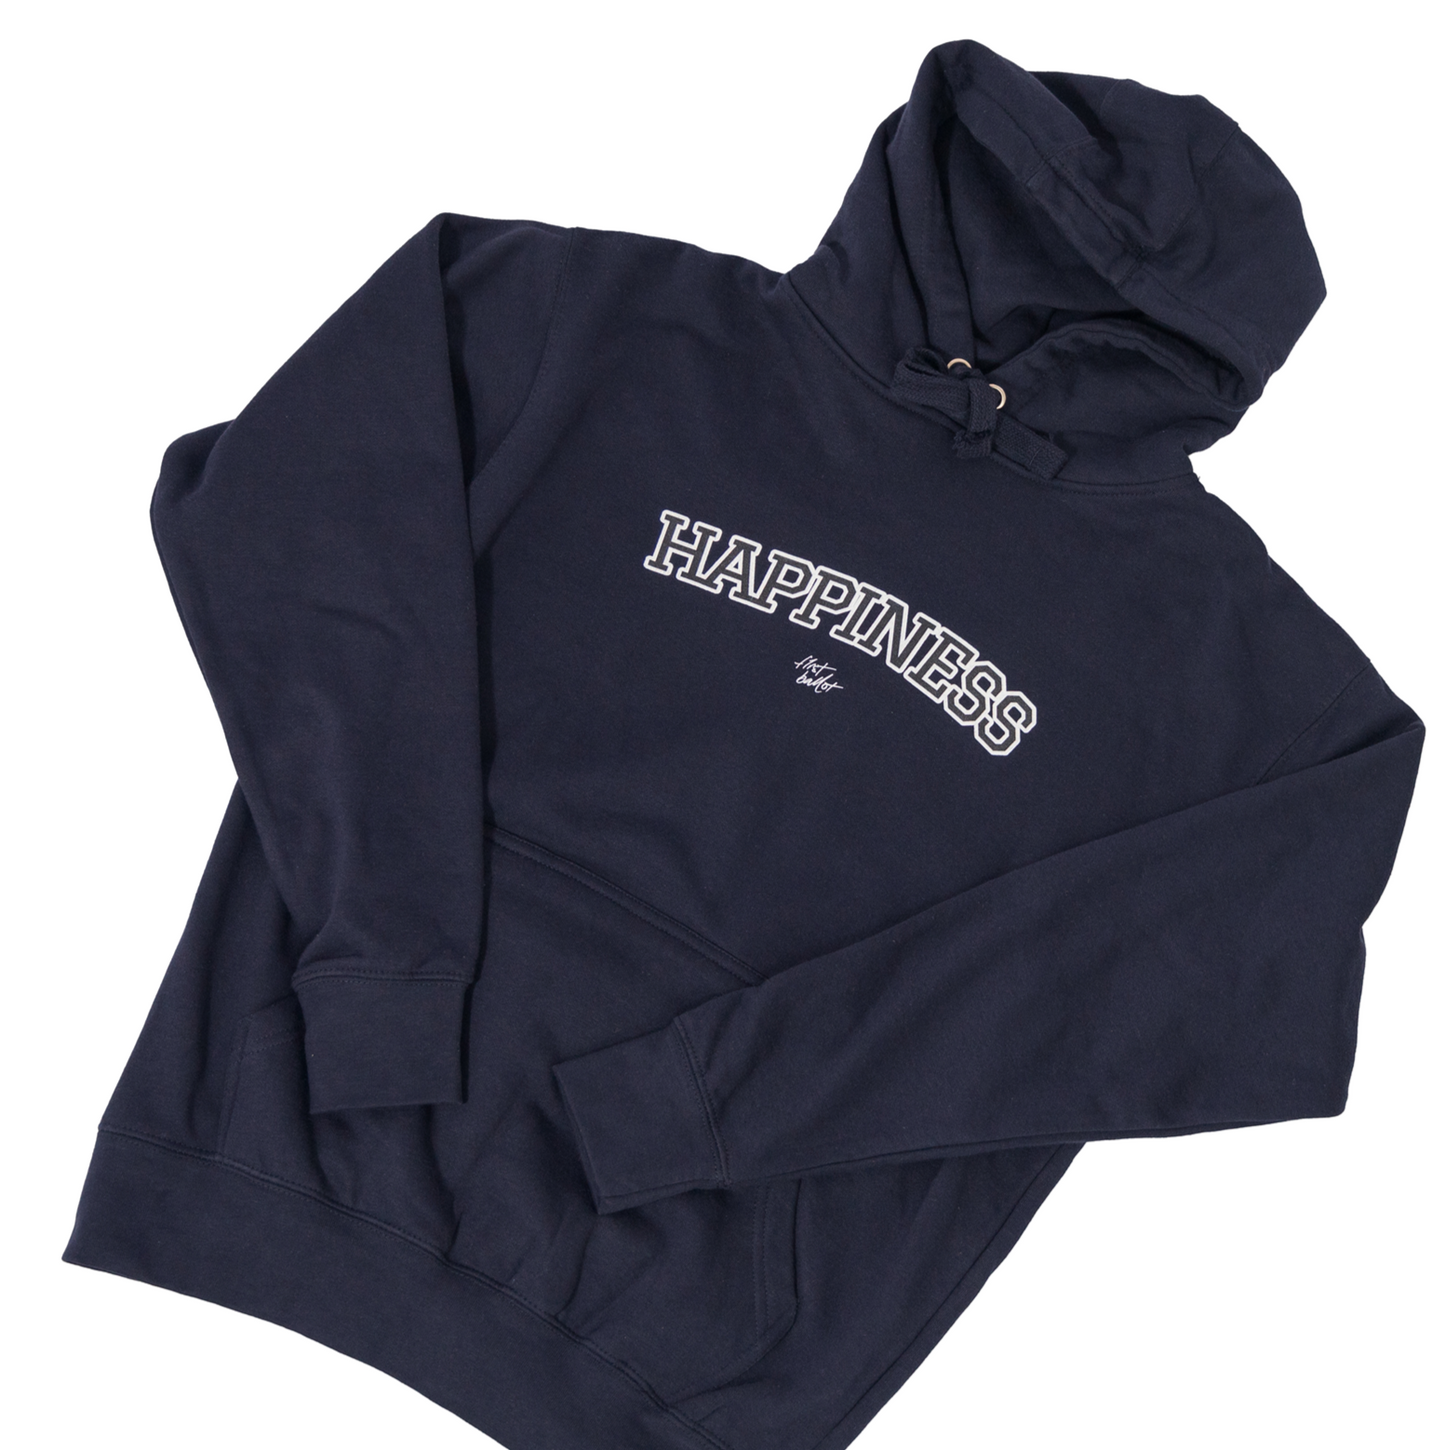 The HAPPINESS Hoodie